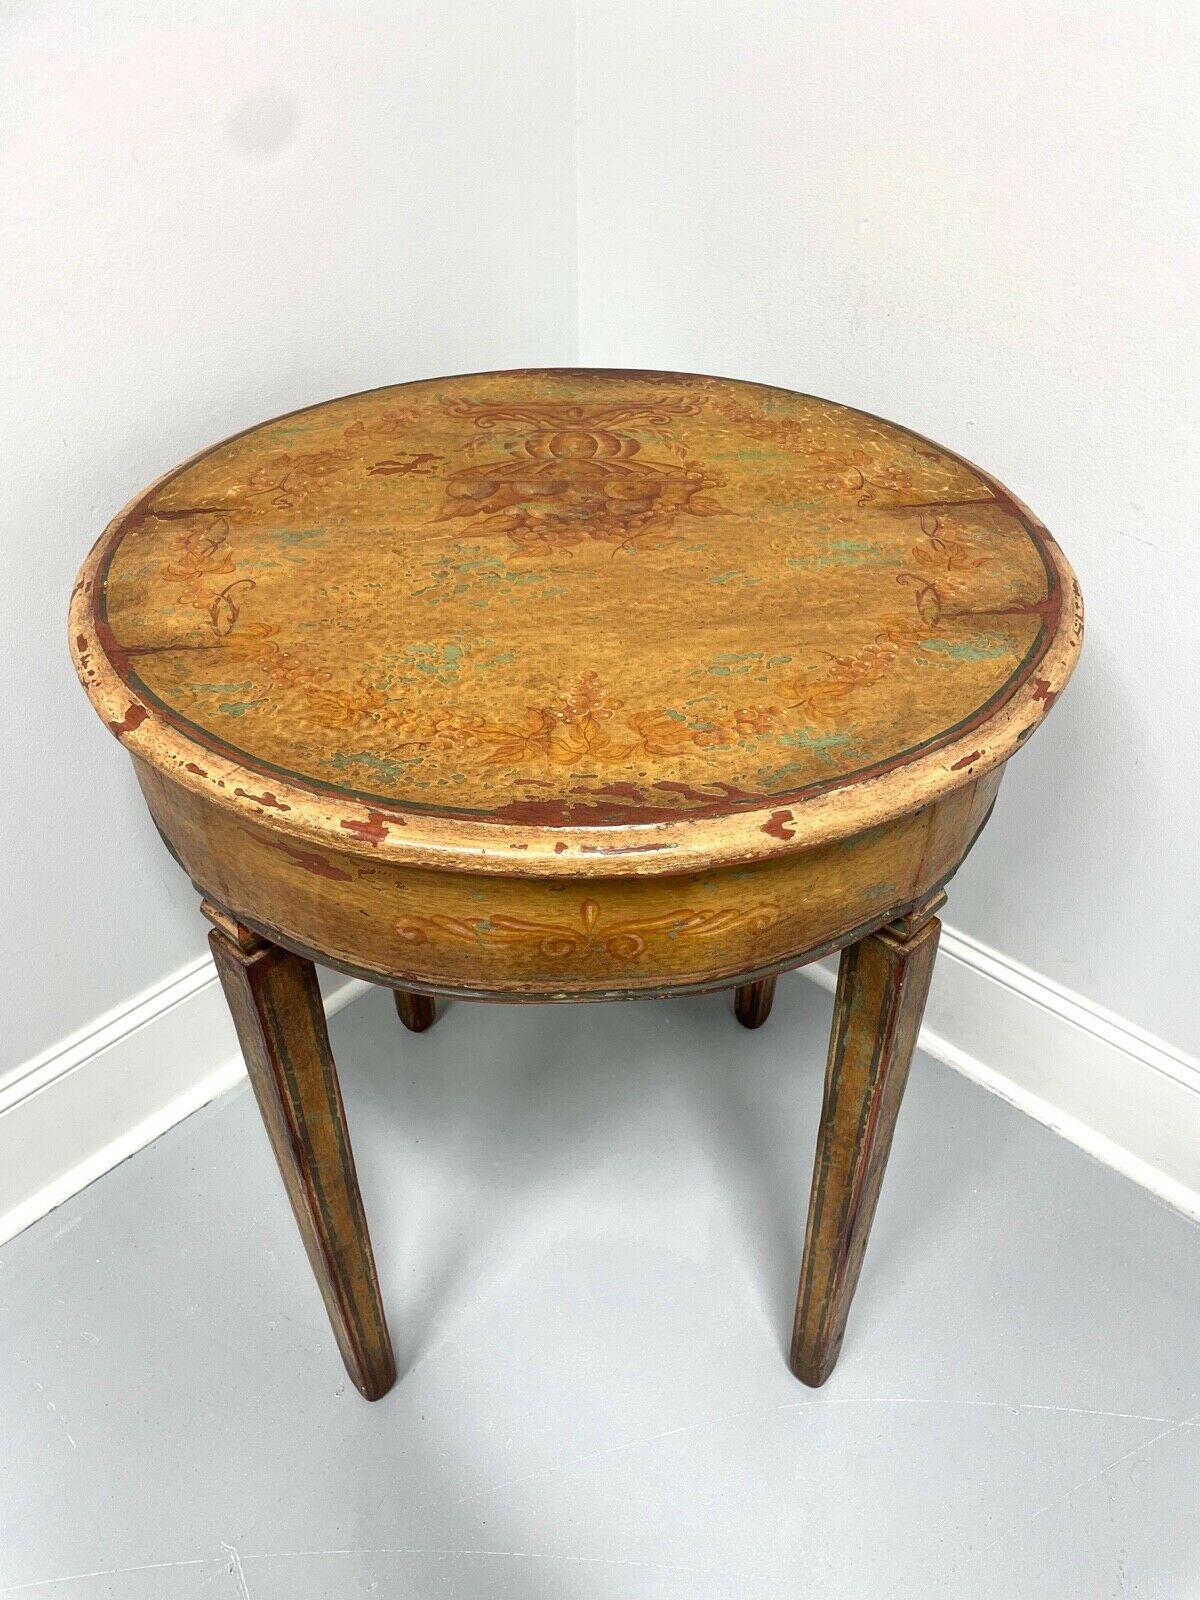 Antique 18th Century Hand Painted Round Accent Table In Fair Condition For Sale In Charlotte, NC